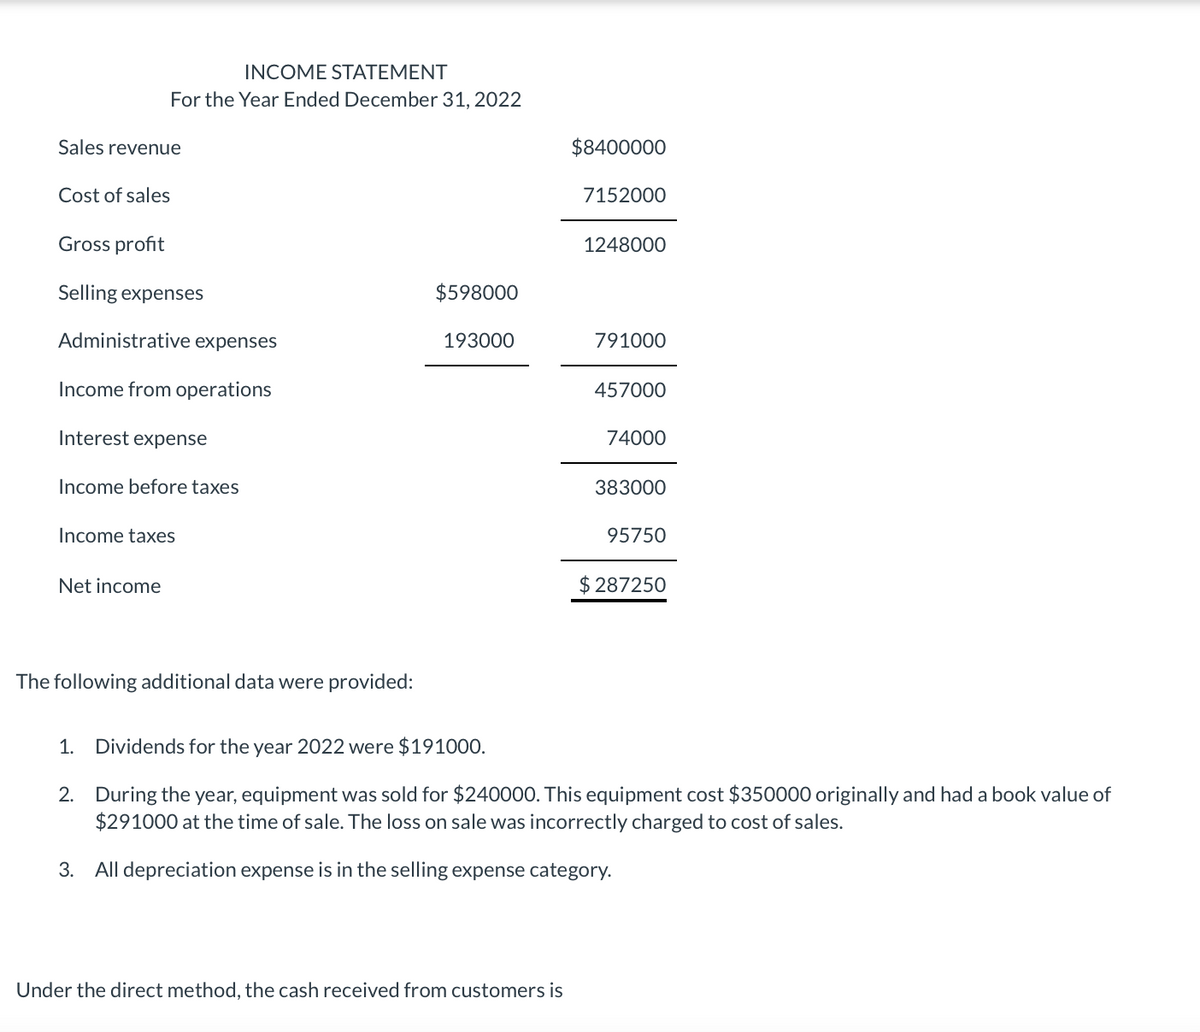 Sales revenue
INCOME STATEMENT
For the Year Ended December 31, 2022
Cost of sales
Gross profit
Selling expenses
Administrative expenses
Income from operations
Interest expense
Income before taxes
Income taxes
Net income
The following additional data were provided:
1.
$598000
193000
$8400000
Under the direct method, the cash received from customers is
7152000
1248000
791000
457000
74000
383000
95750
Dividends for the year 2022 were $191000.
2. During the year, equipment was sold for $240000. This equipment cost $350000 originally and had a book value of
$291000 at the time of sale. The loss on sale was incorrectly charged to cost of sales.
3. All depreciation expense is in the selling expense category.
$287250